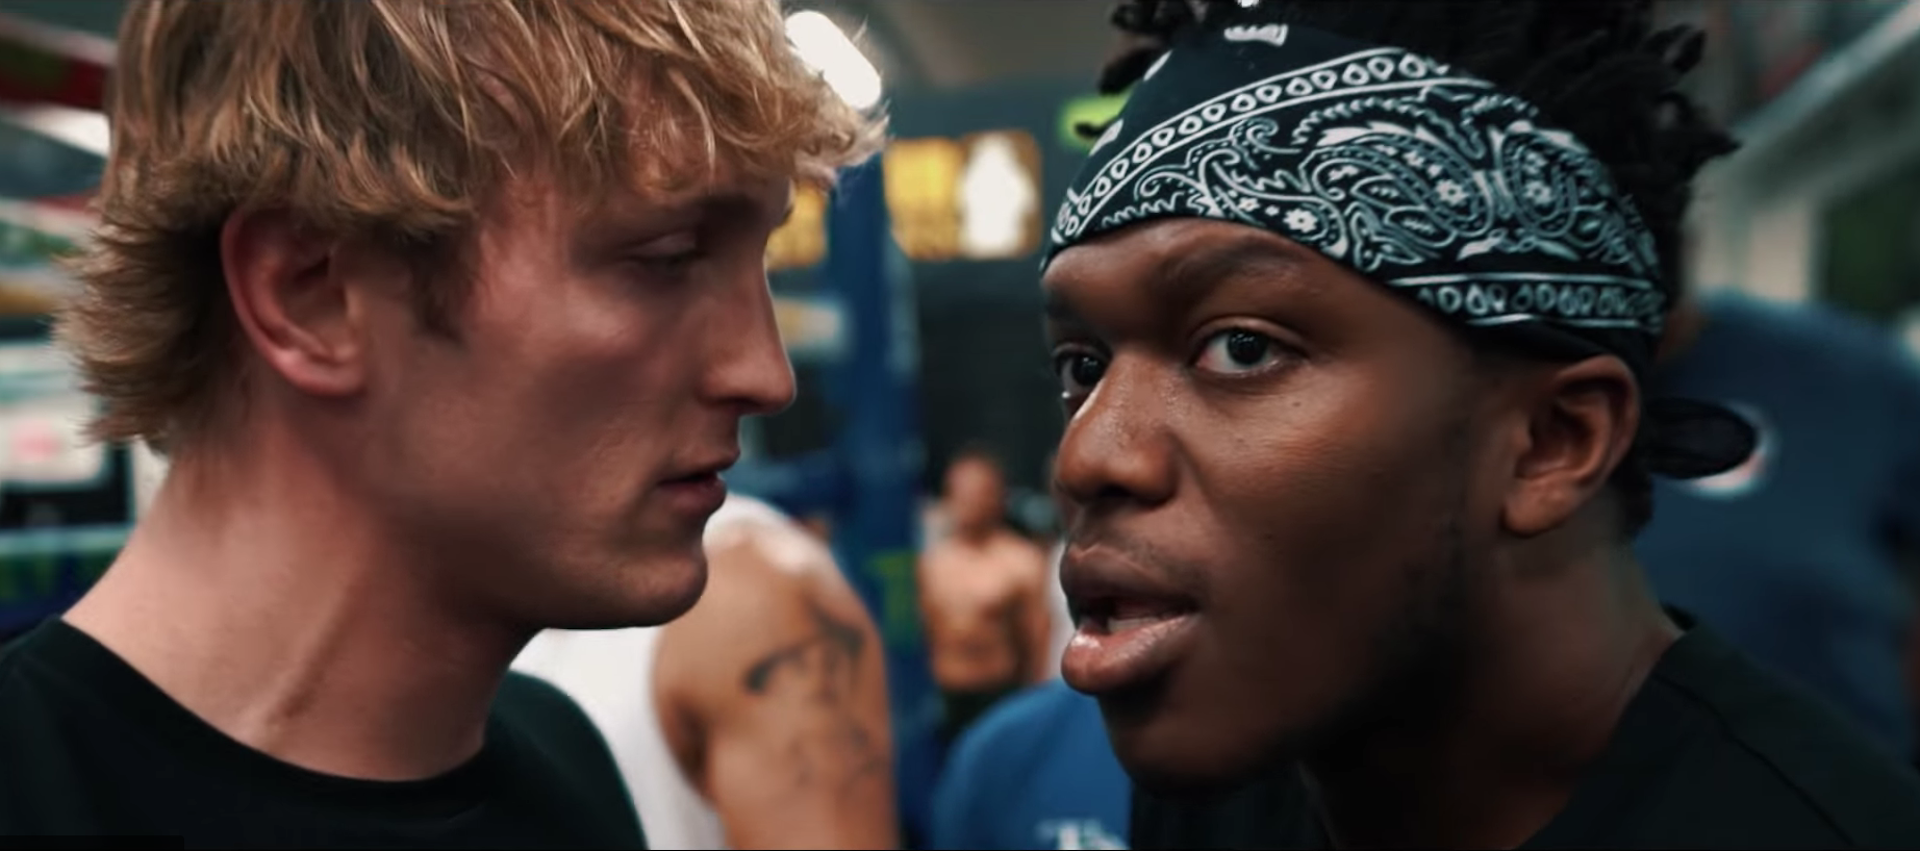 KSI vs Logan Paul YouTube boxing match stars sparring with traditional broadcasters to make millions